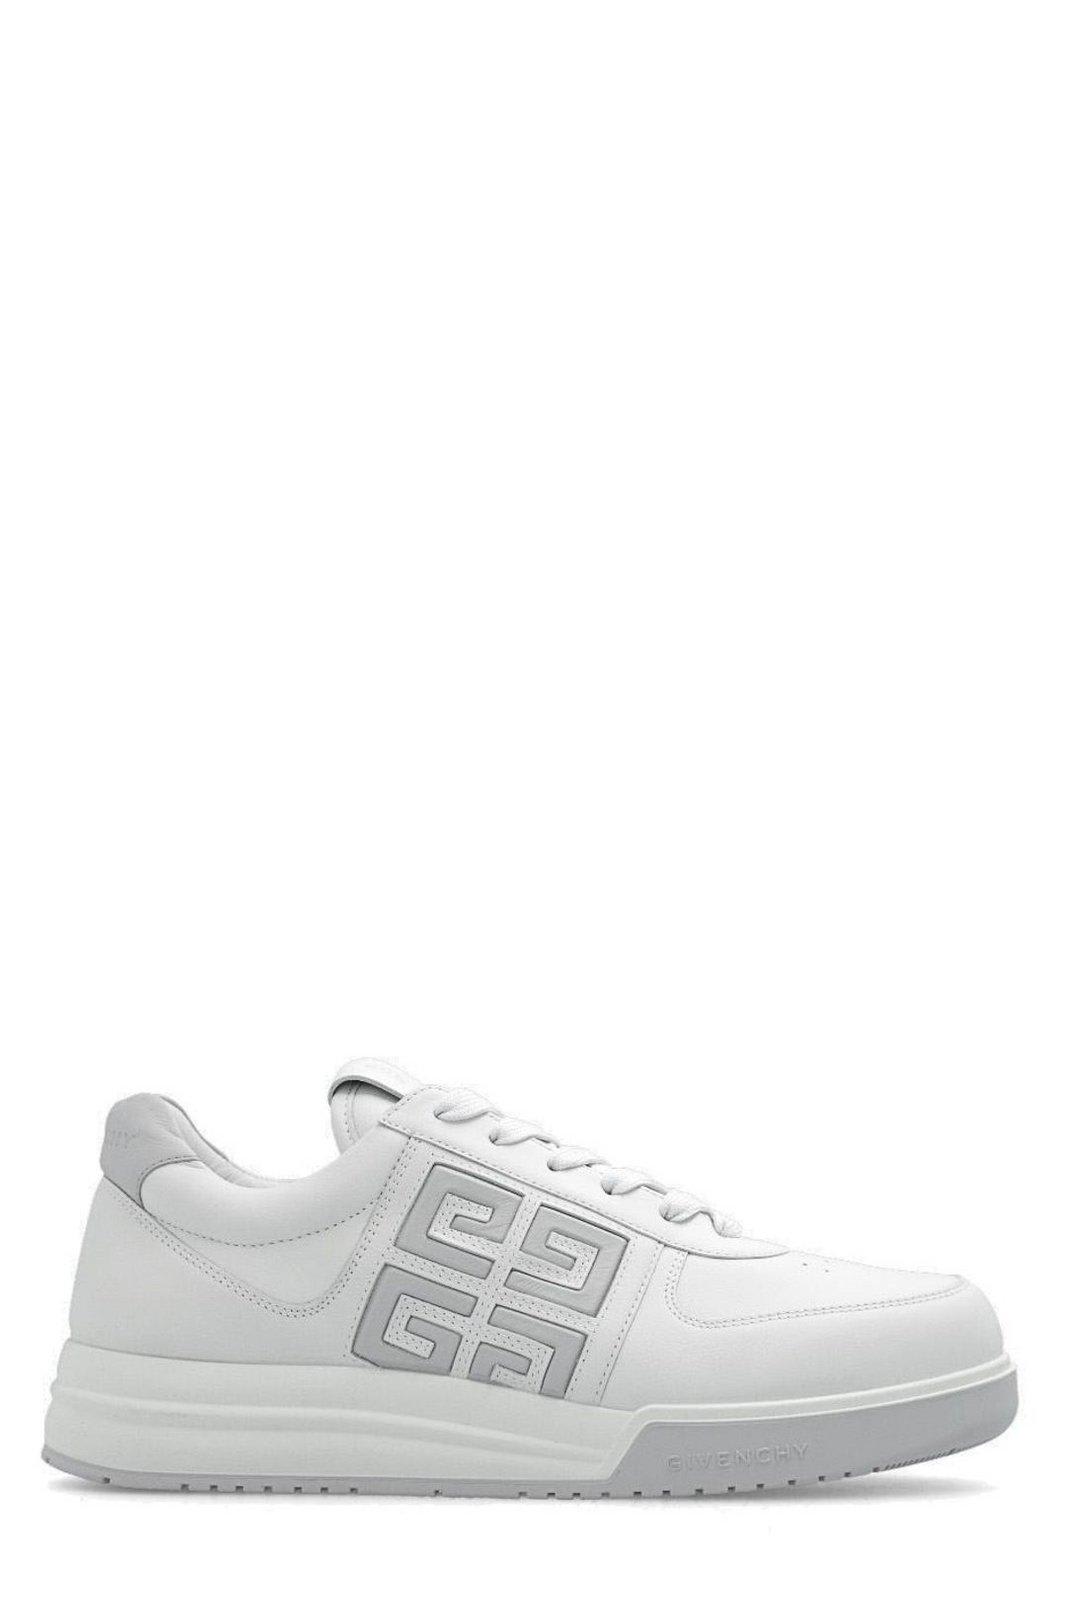 Givenchy 4g Logo Detailed Low-top Sneakers